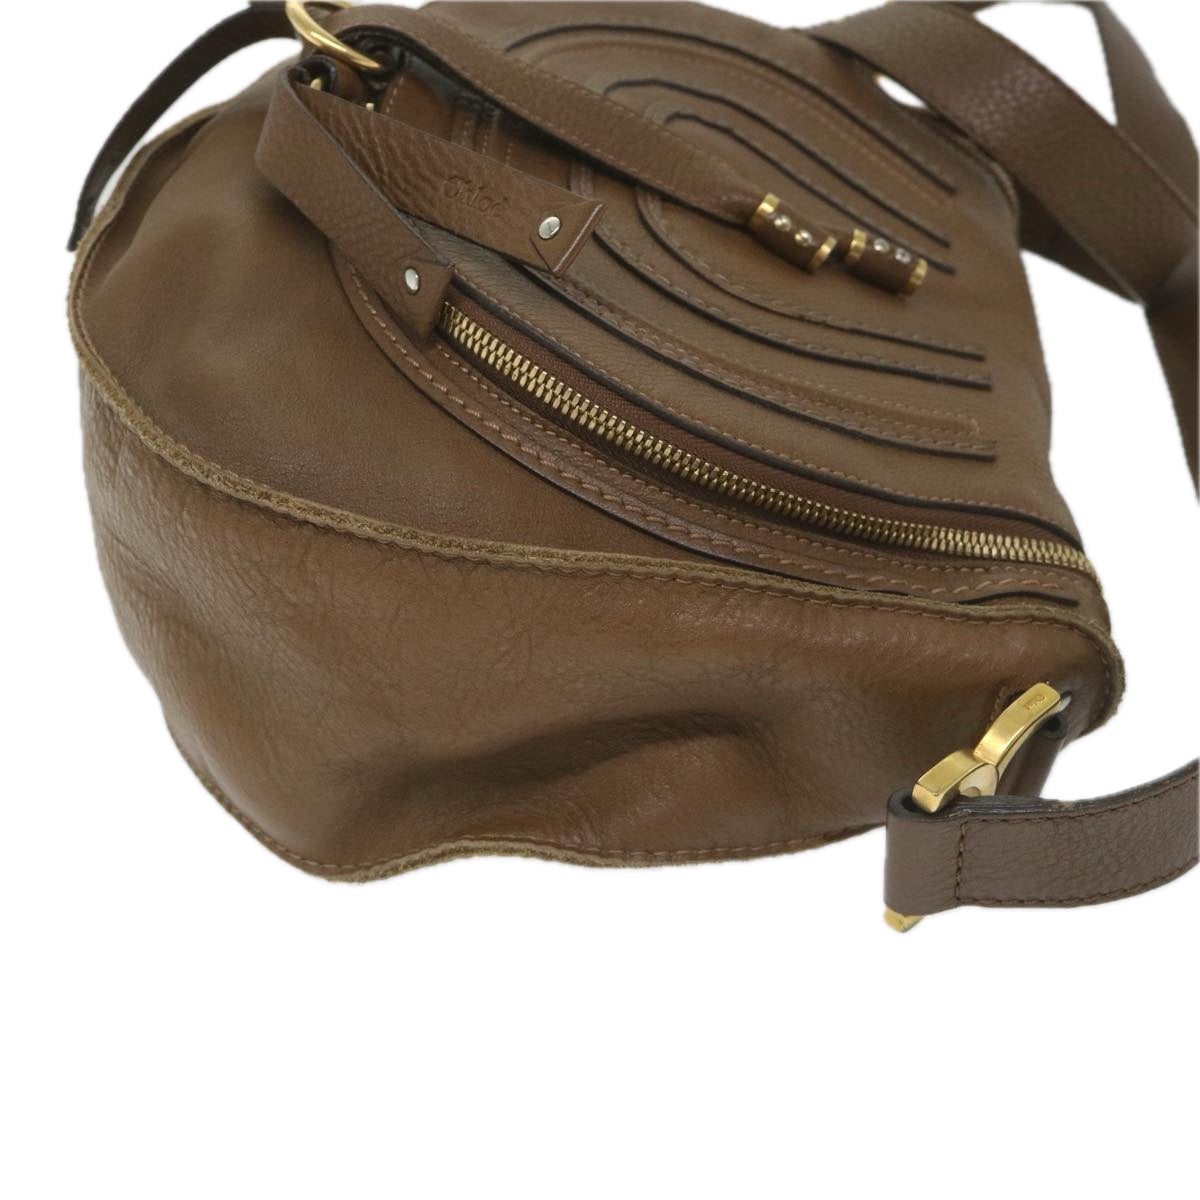 Chloe Mercy Shoulder Bag Leather Brown Auth 58160